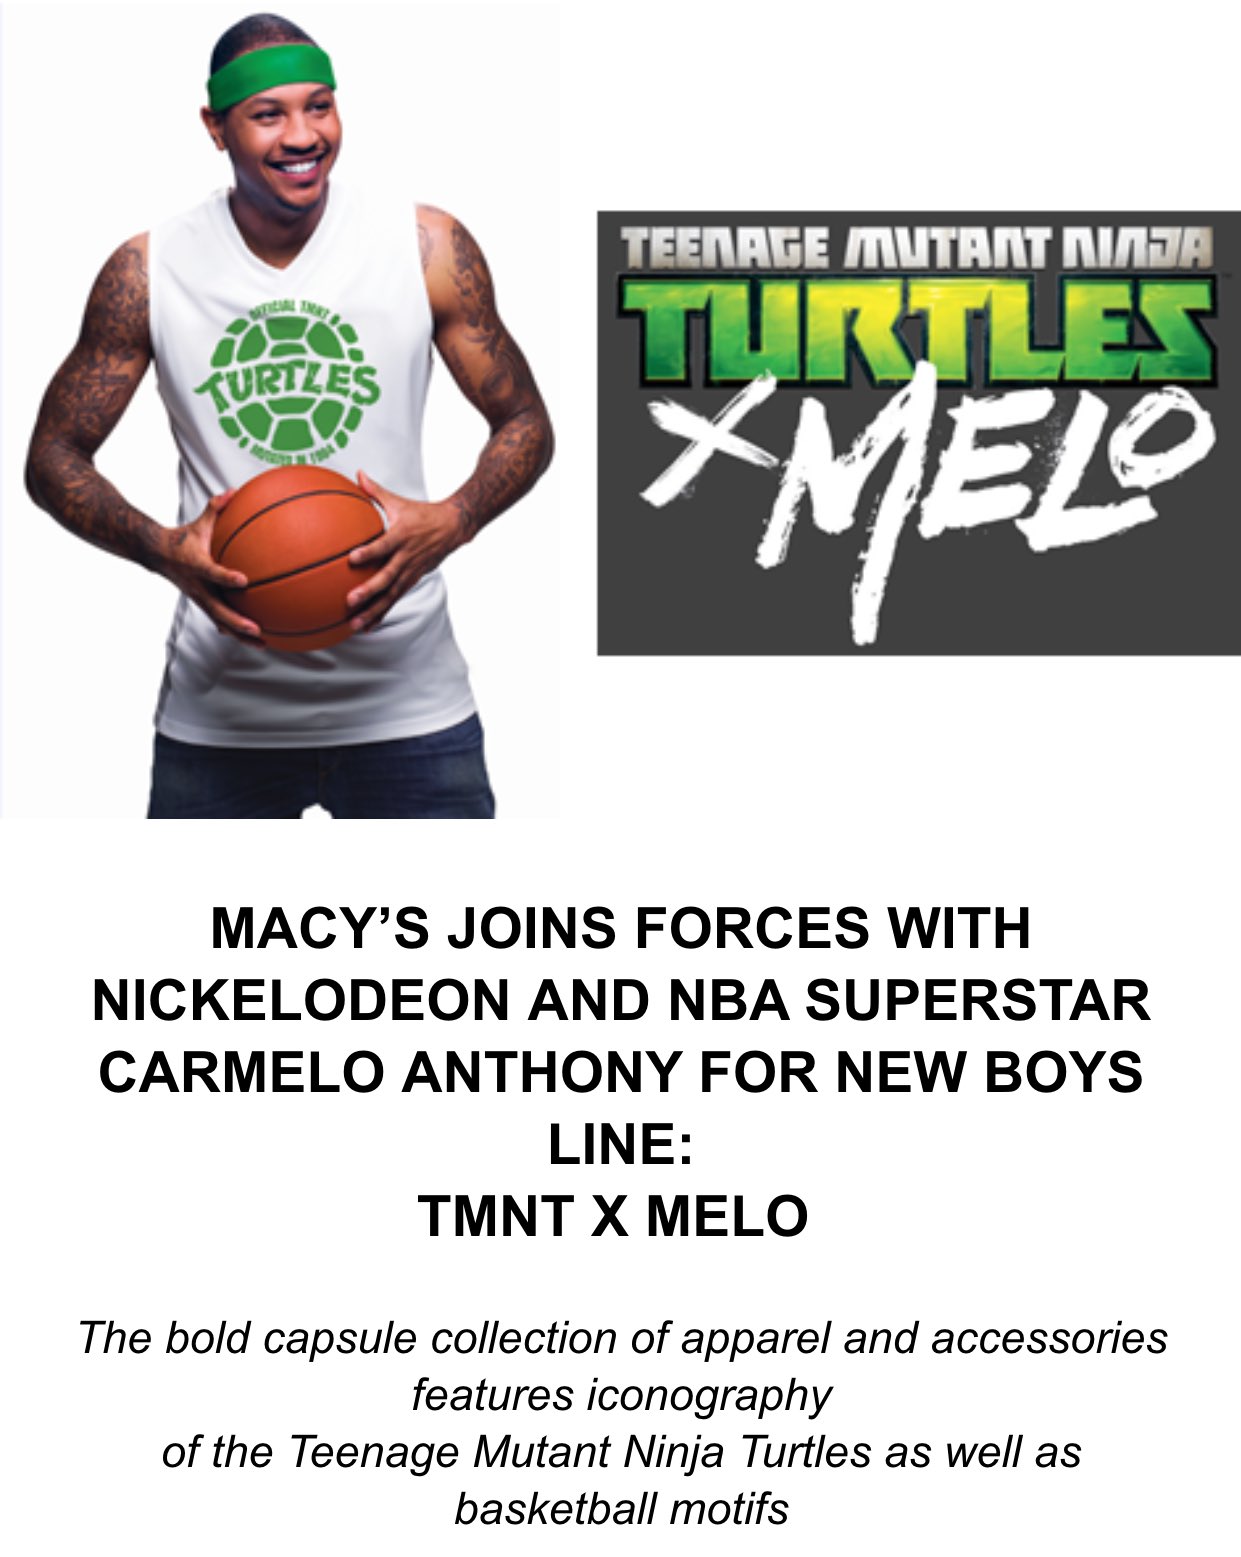 Arash Markazi on X: "Carmelo Anthony is starting an apparel and inspired by the Teenage Mutant Ninja Turtles. https://t.co/wxhGec5X7m" / X